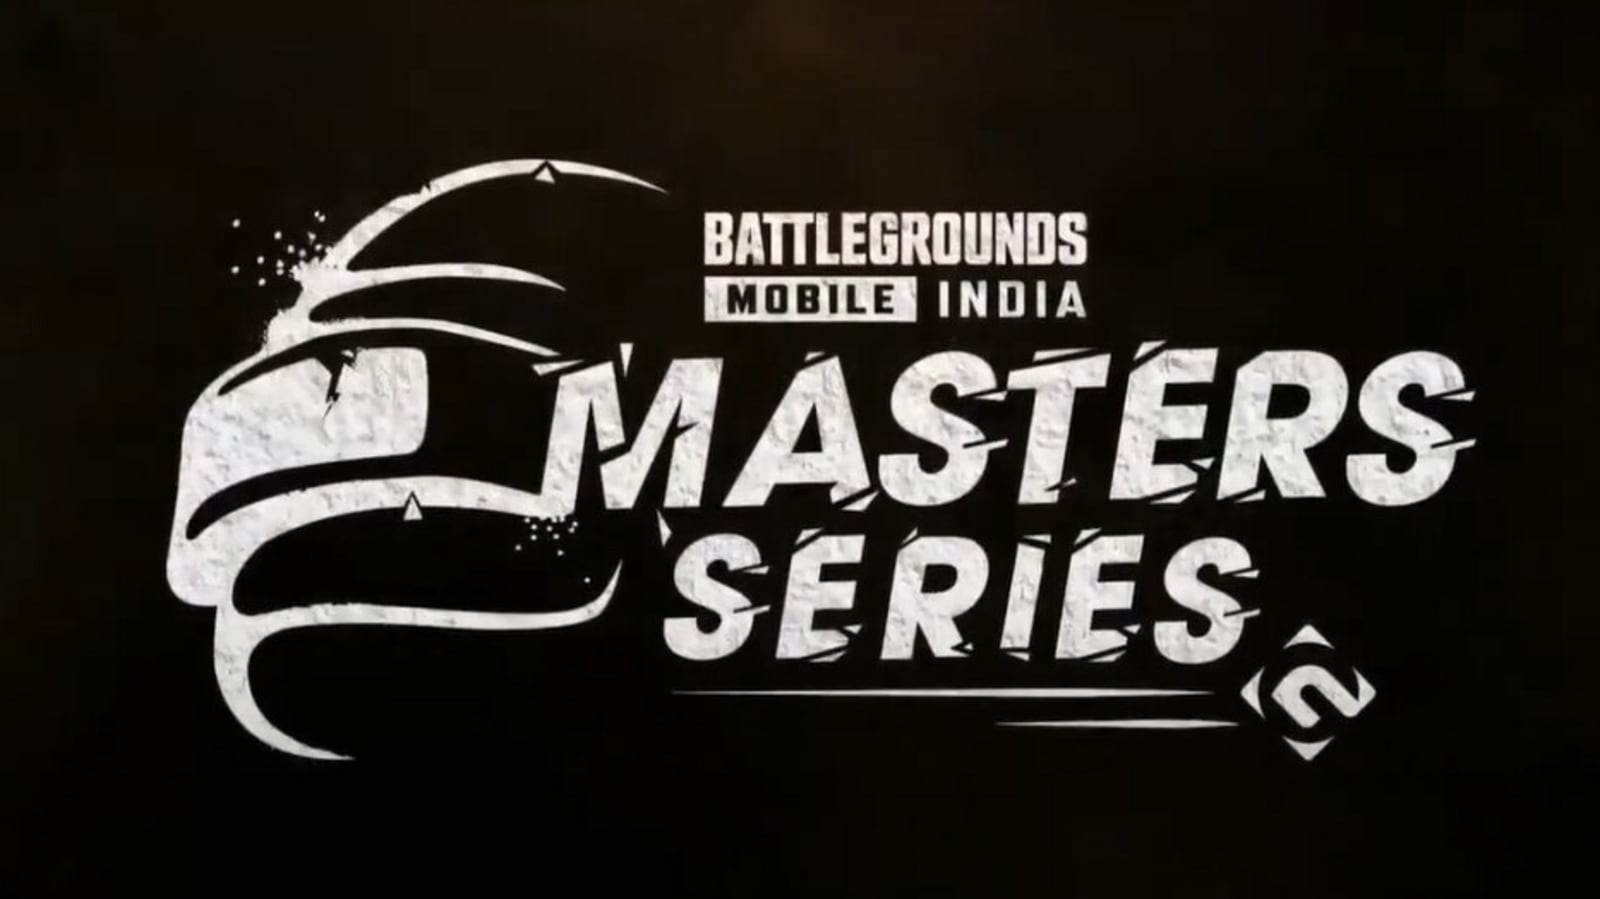 BGMI Master Series 2022 Livestream Know the full schedule, format and teams in this biggest esports event Gaming News